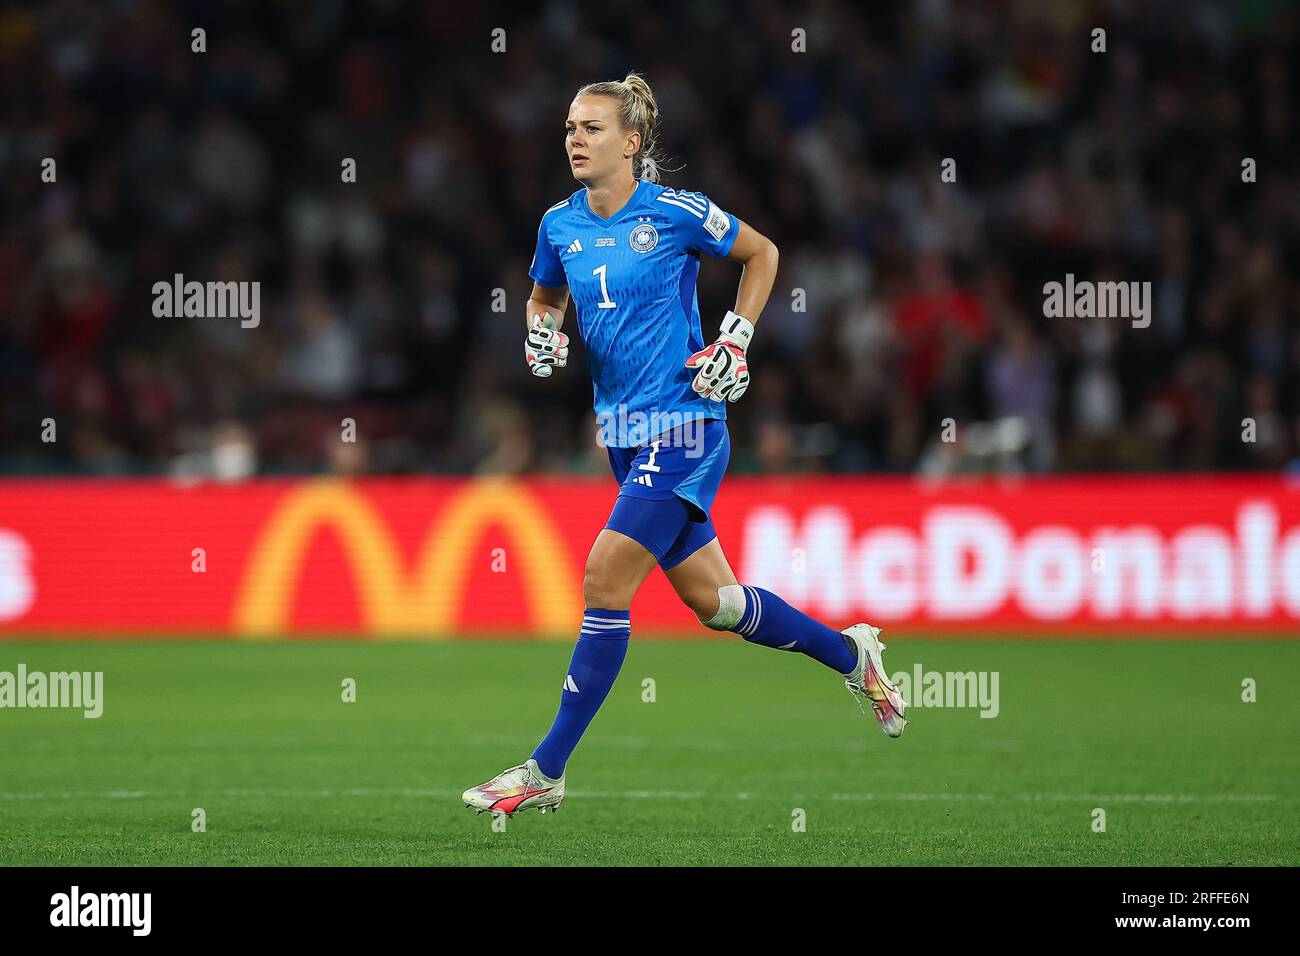 Merle Frohms #1 of Germany during the FIFA Women's World Cup 2023 Group H match South Korea vs Germany Women at Suncorp Stadium, Brisbane, Australia, 3rd August 2023 (Photo by Patrick Hoelscher/News Images) Credit: News Images LTD/Alamy Live News Stock Photo